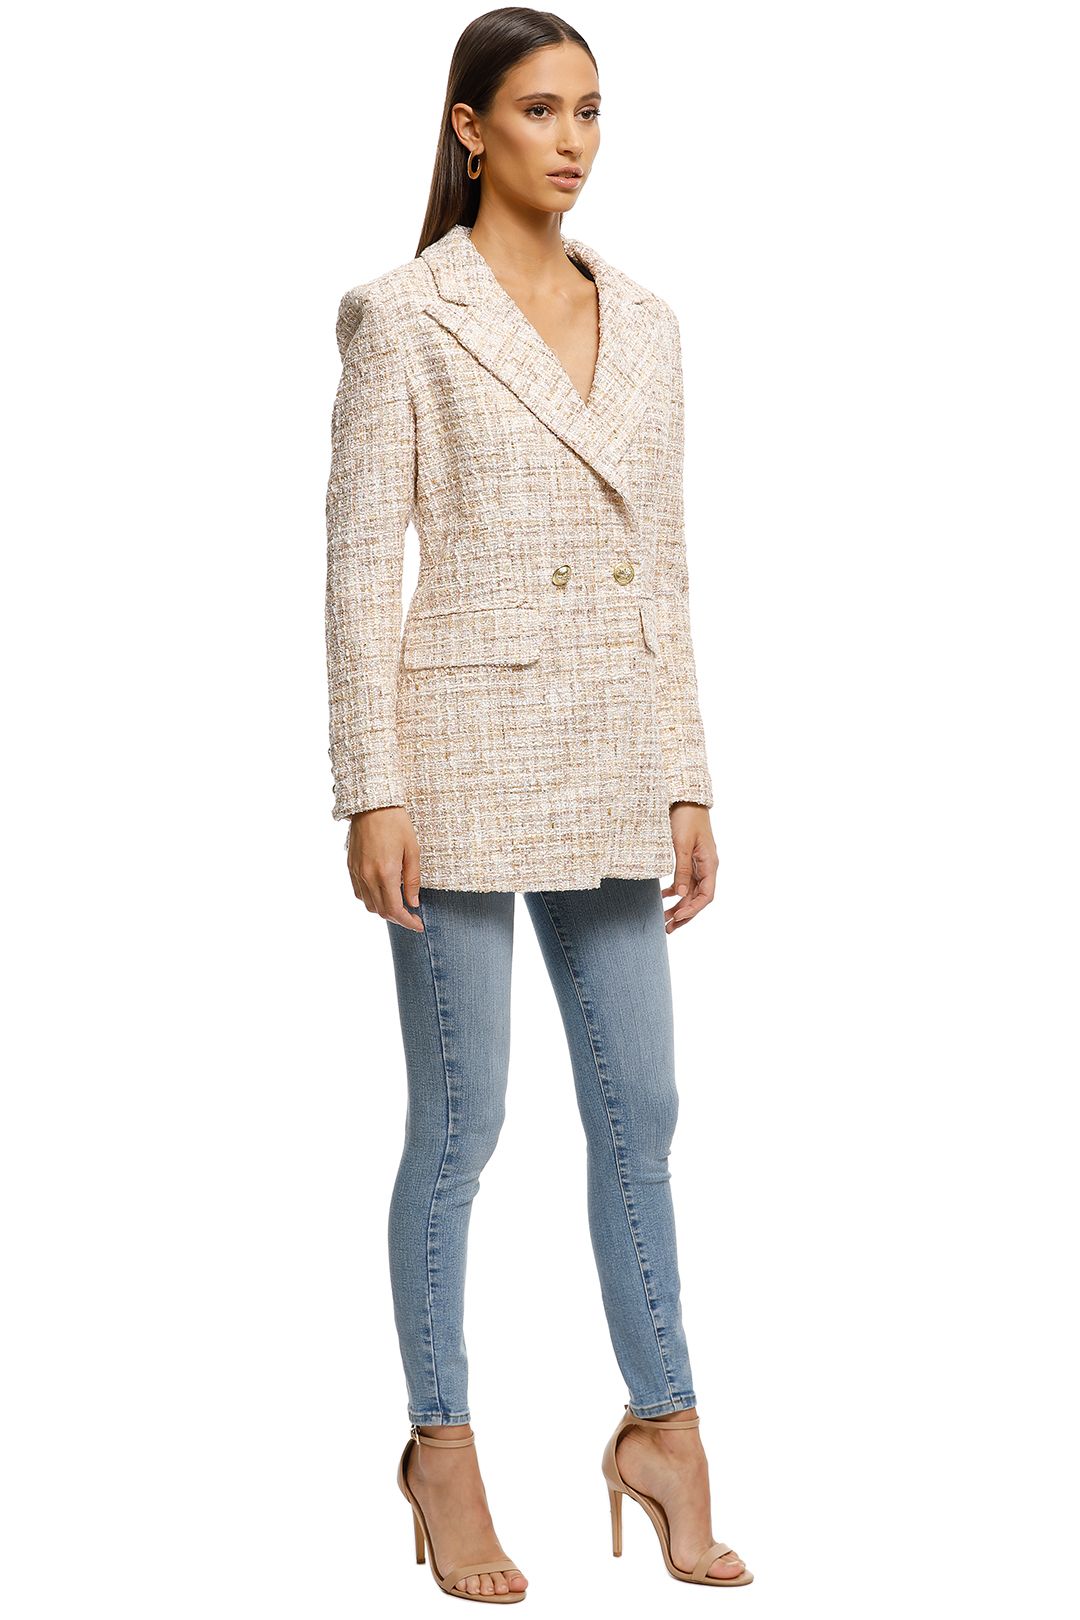 Alexia-Admor-Double-Breasted-Tweed-Jacket-Cream-Side